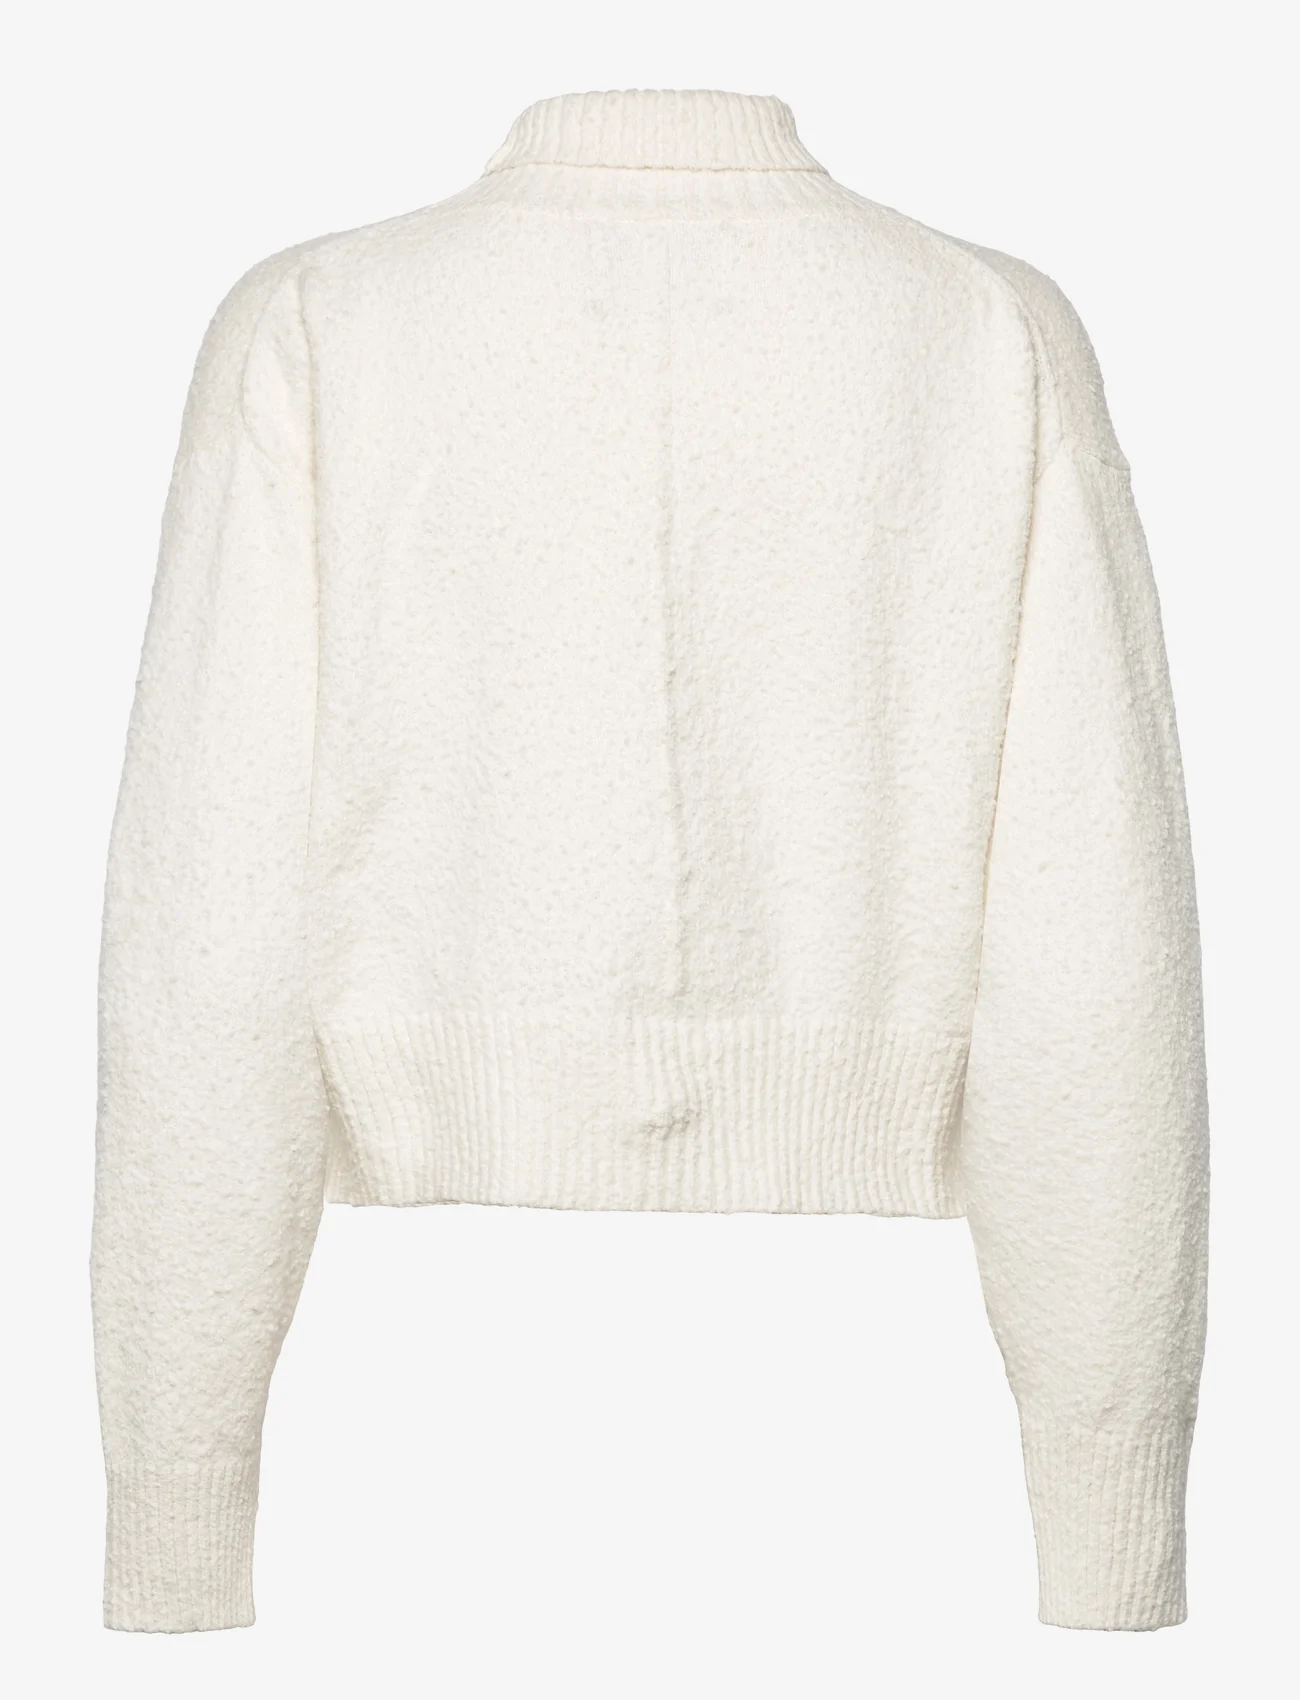 Calvin Klein Jeans - BOUCLE HIGH NECK SWEATER - sweaters - ivory - 1